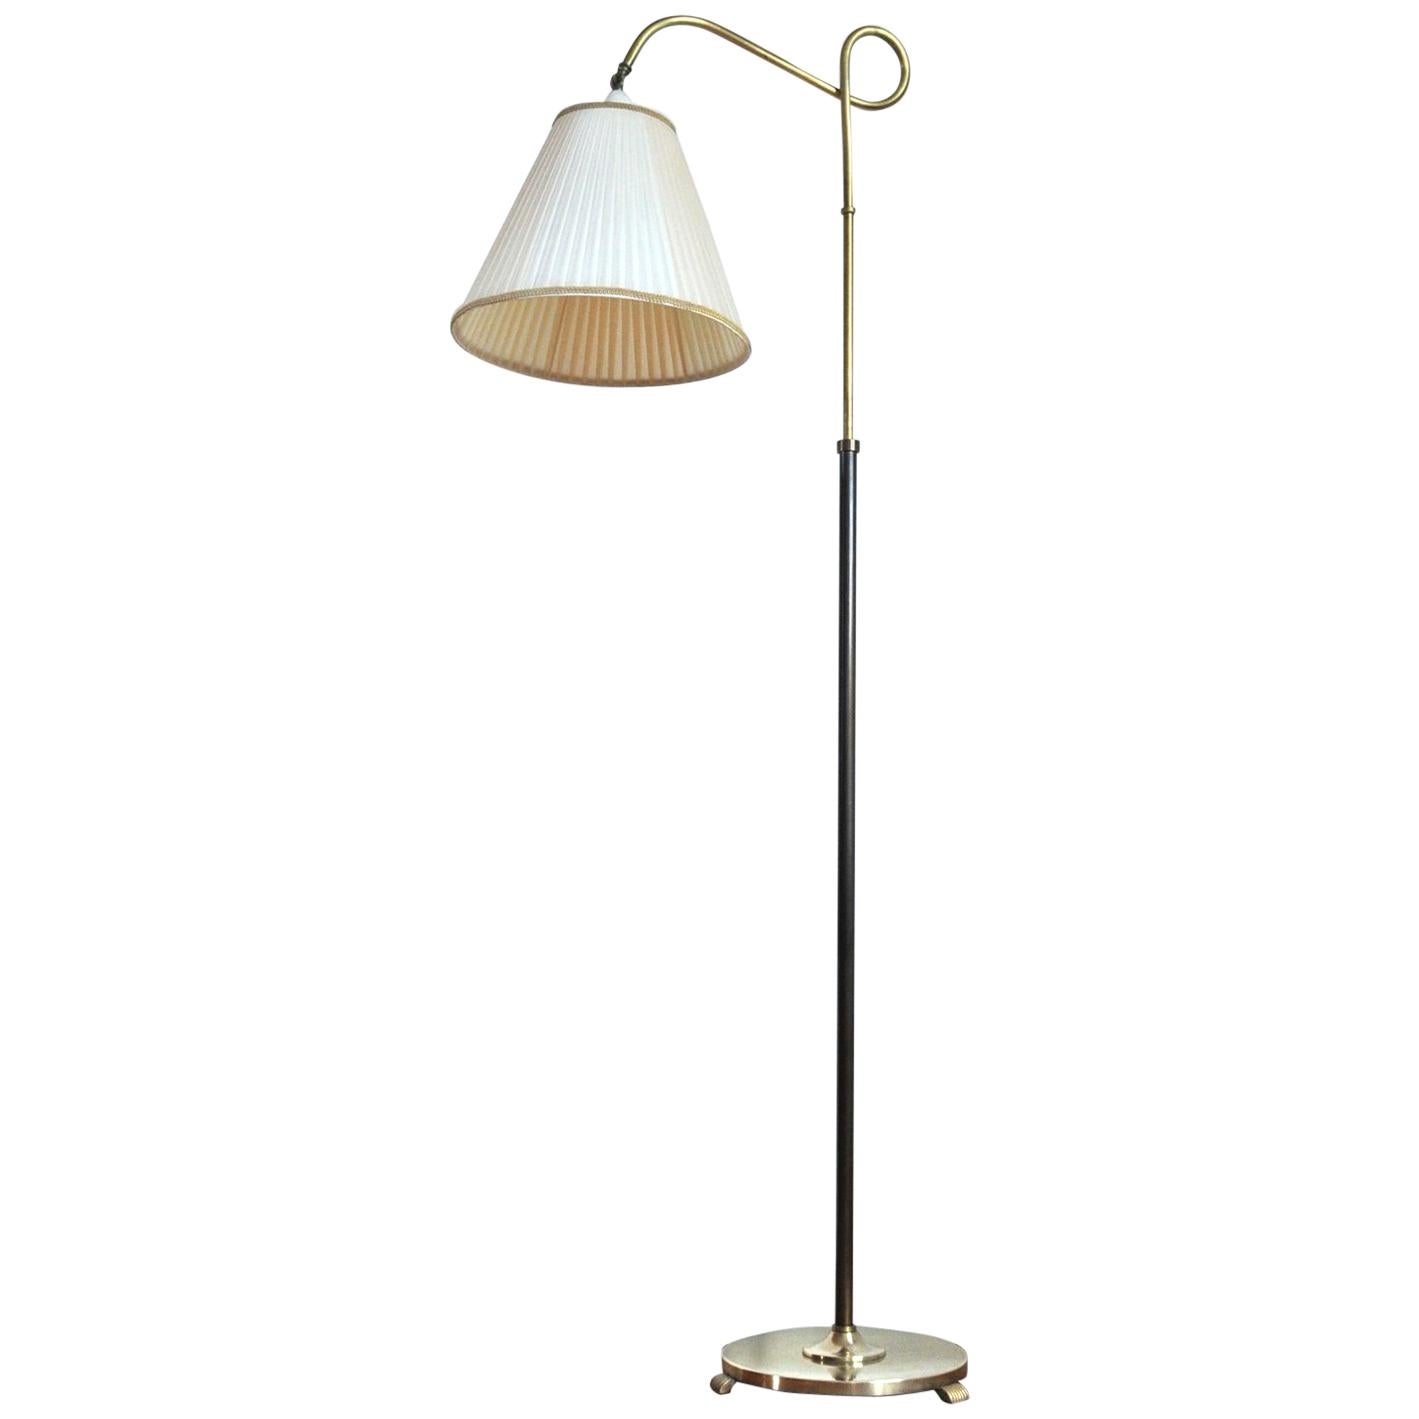 Art Deco Floor Lamp in Brass and Browned Brass with Original Shade